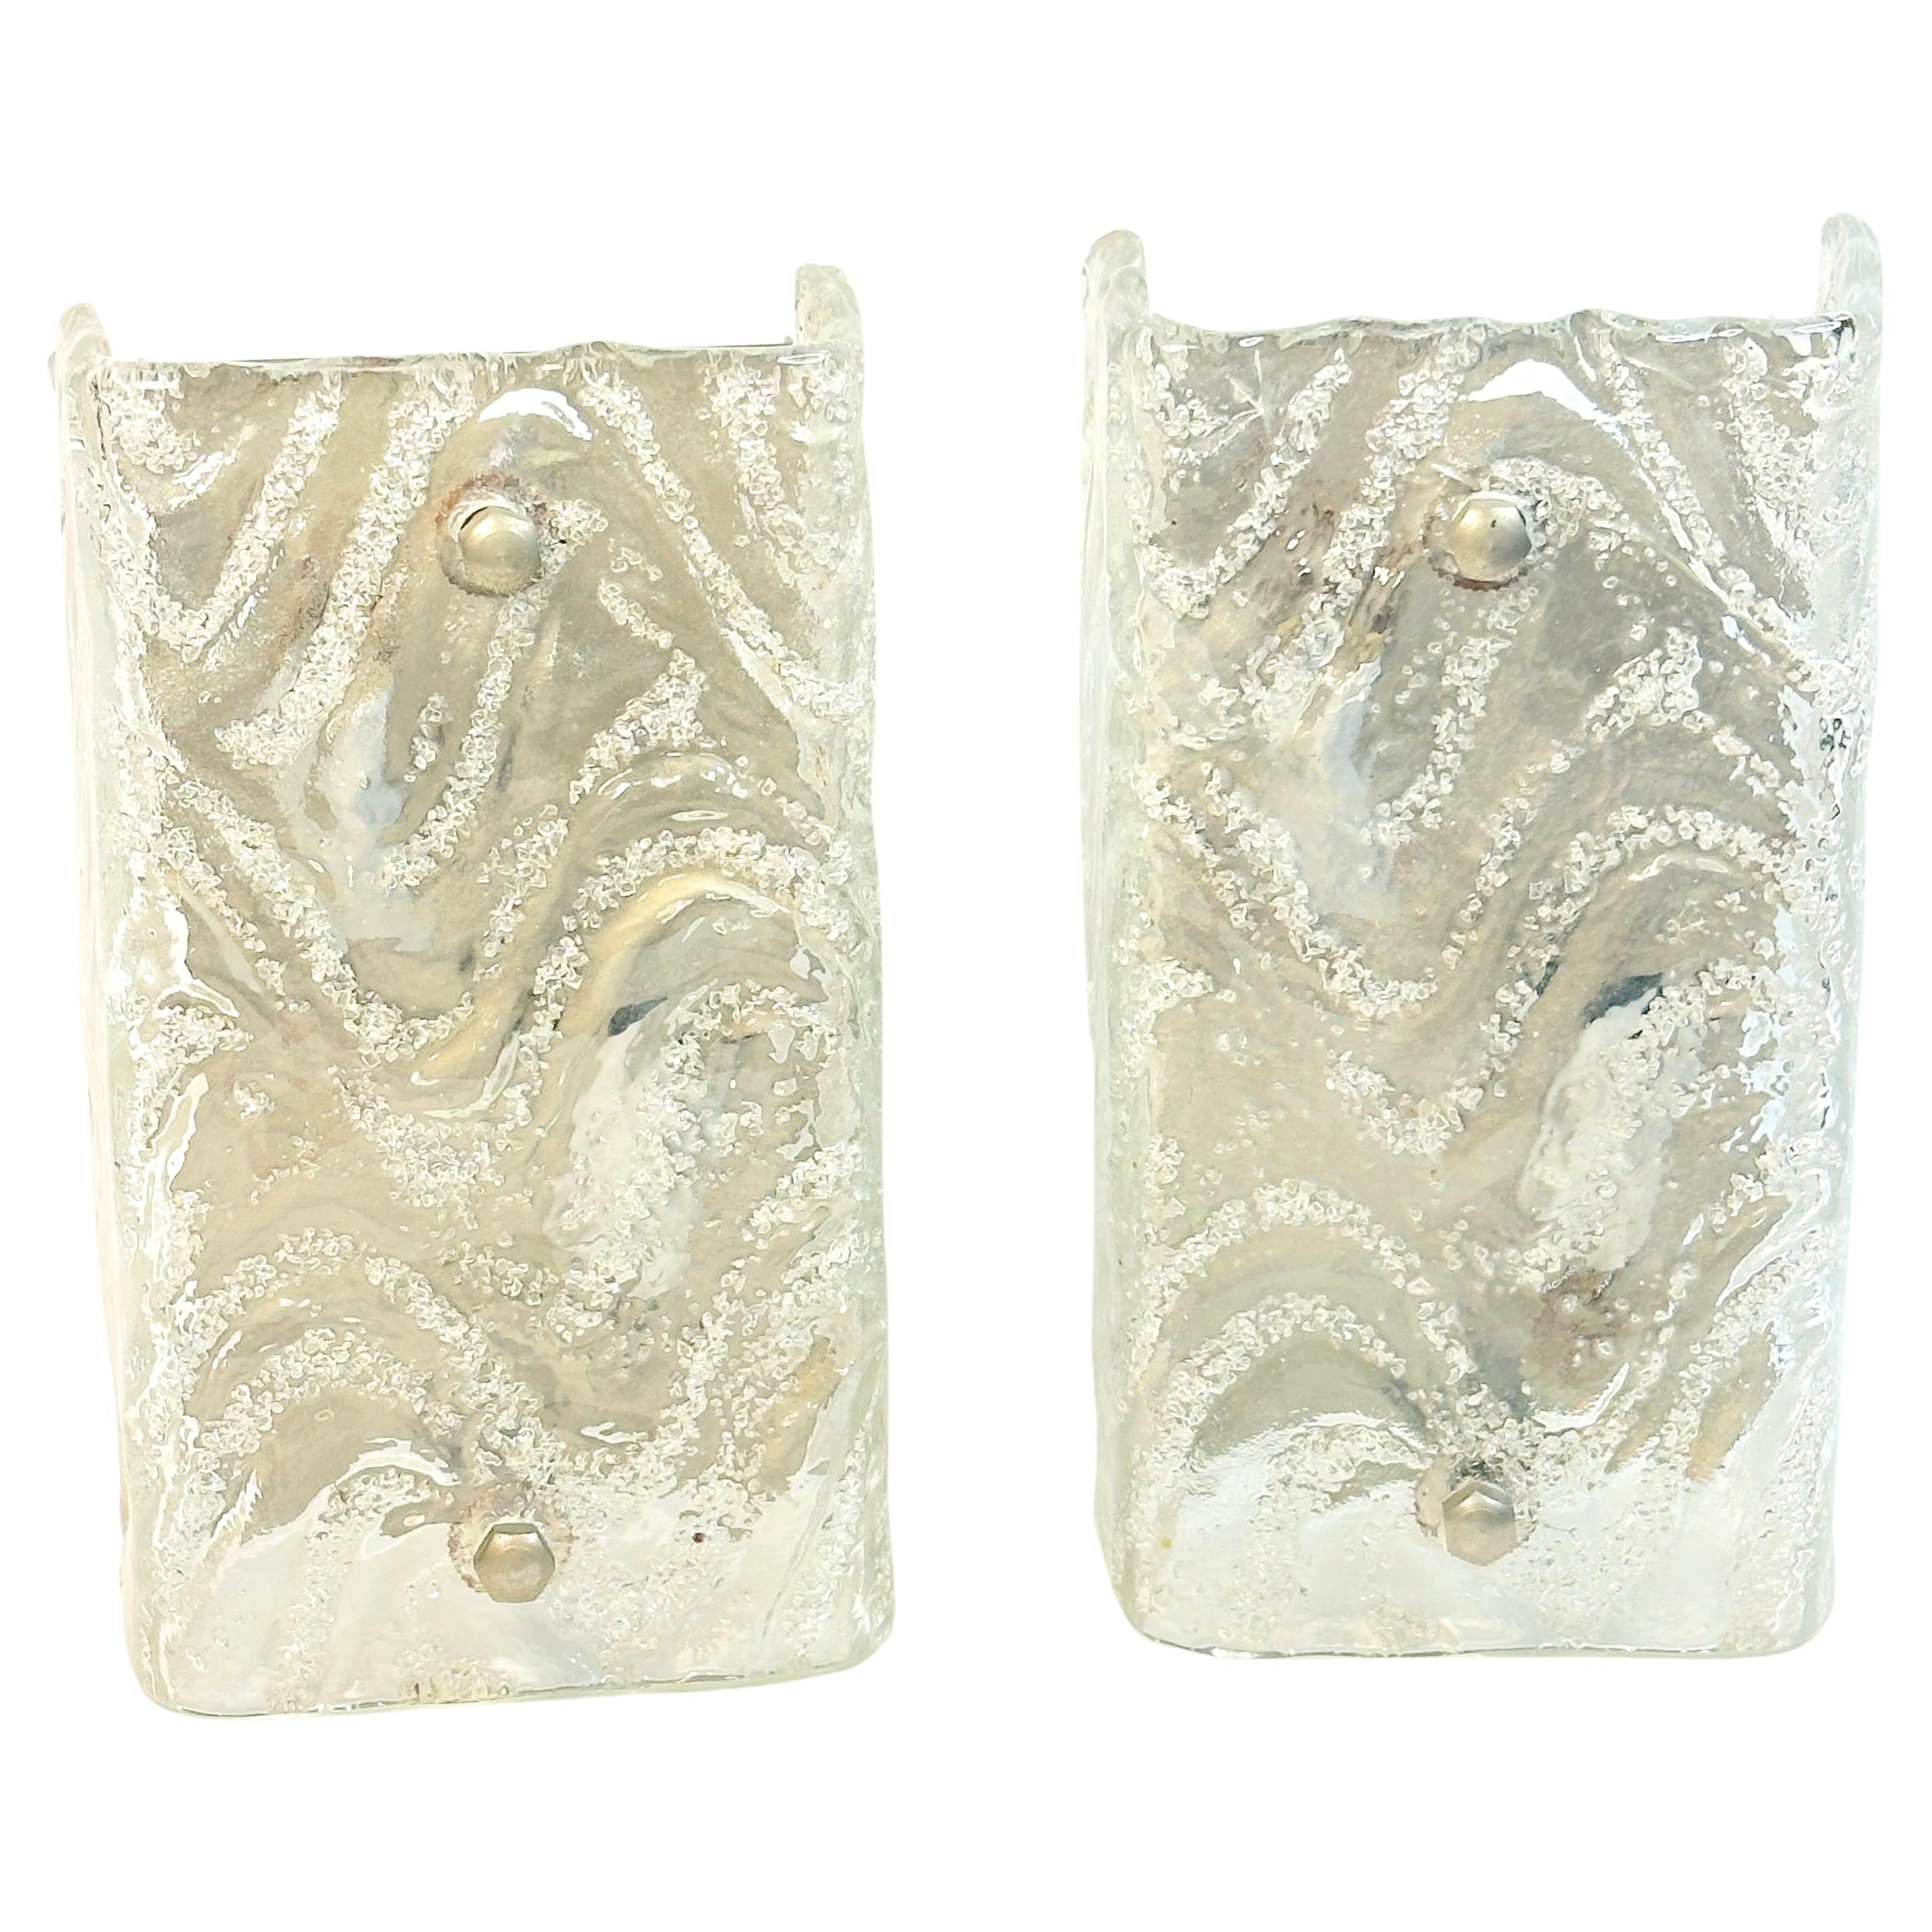 Stunning Pair of Murano Glass Ice Block Sconces with Swirl or Wave Pattern 1960s